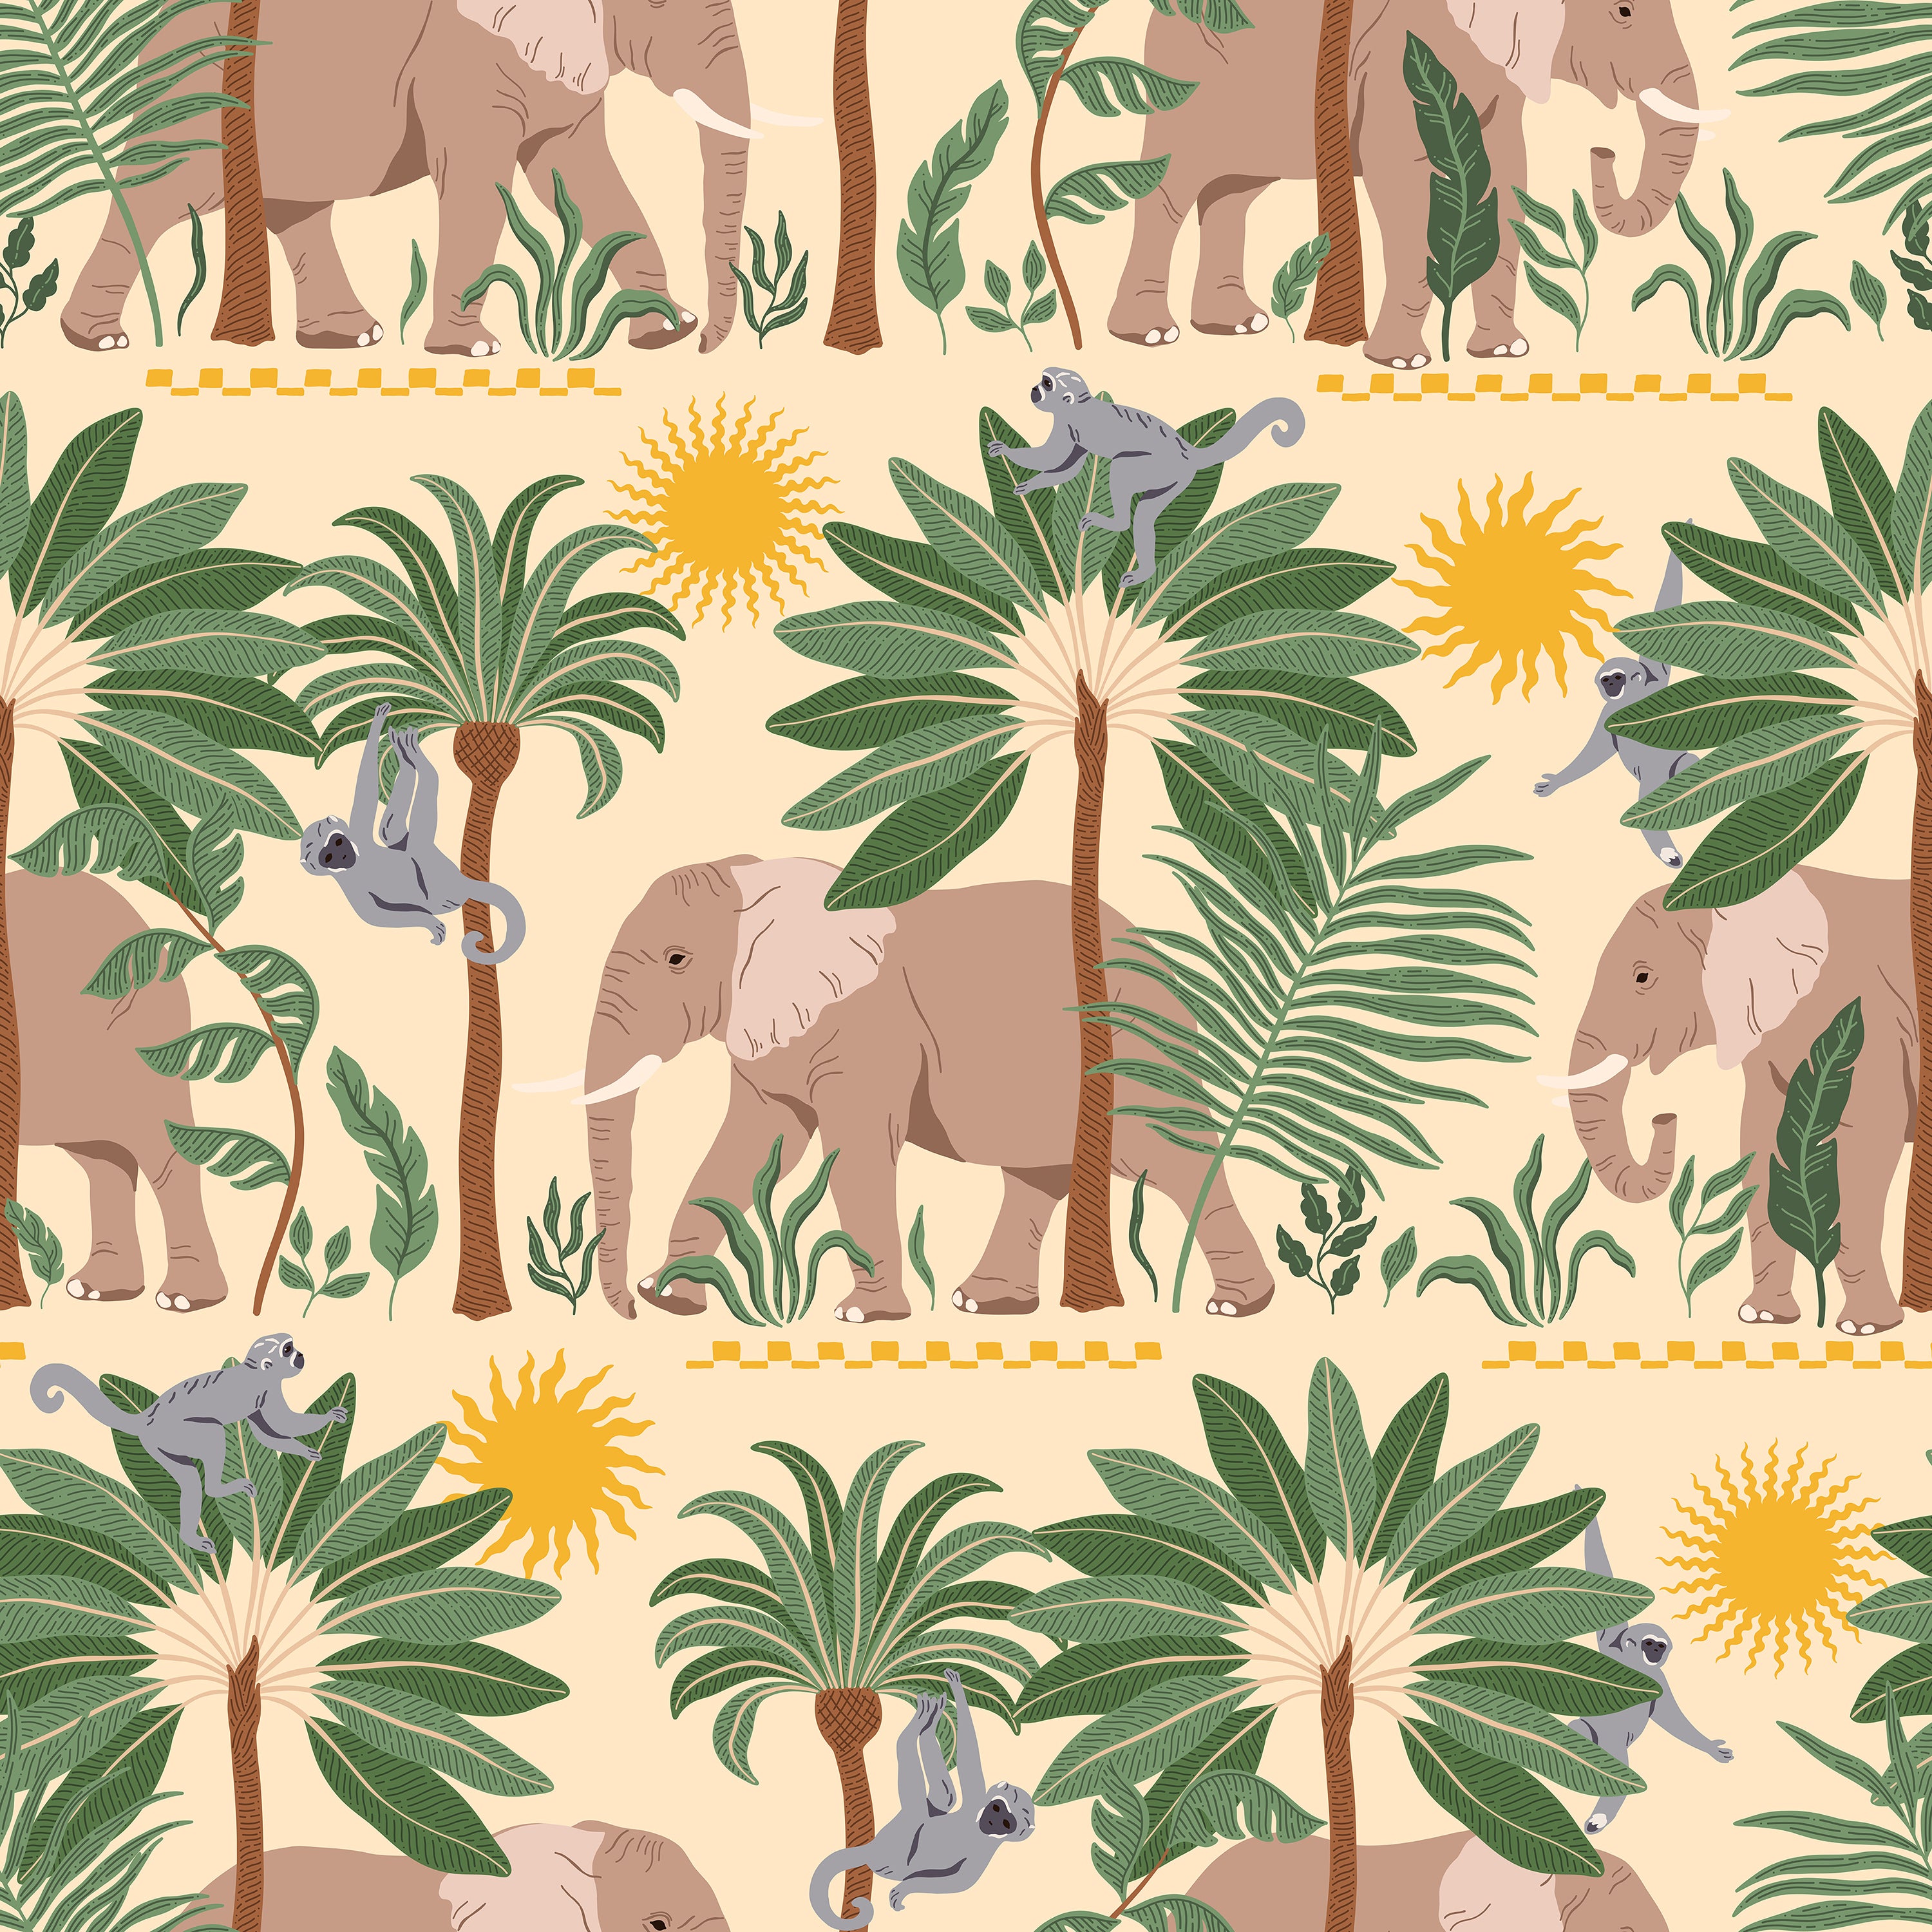 Repeat pattern of Tropical Dreams Animal Wallpaper with elephants and palm trees